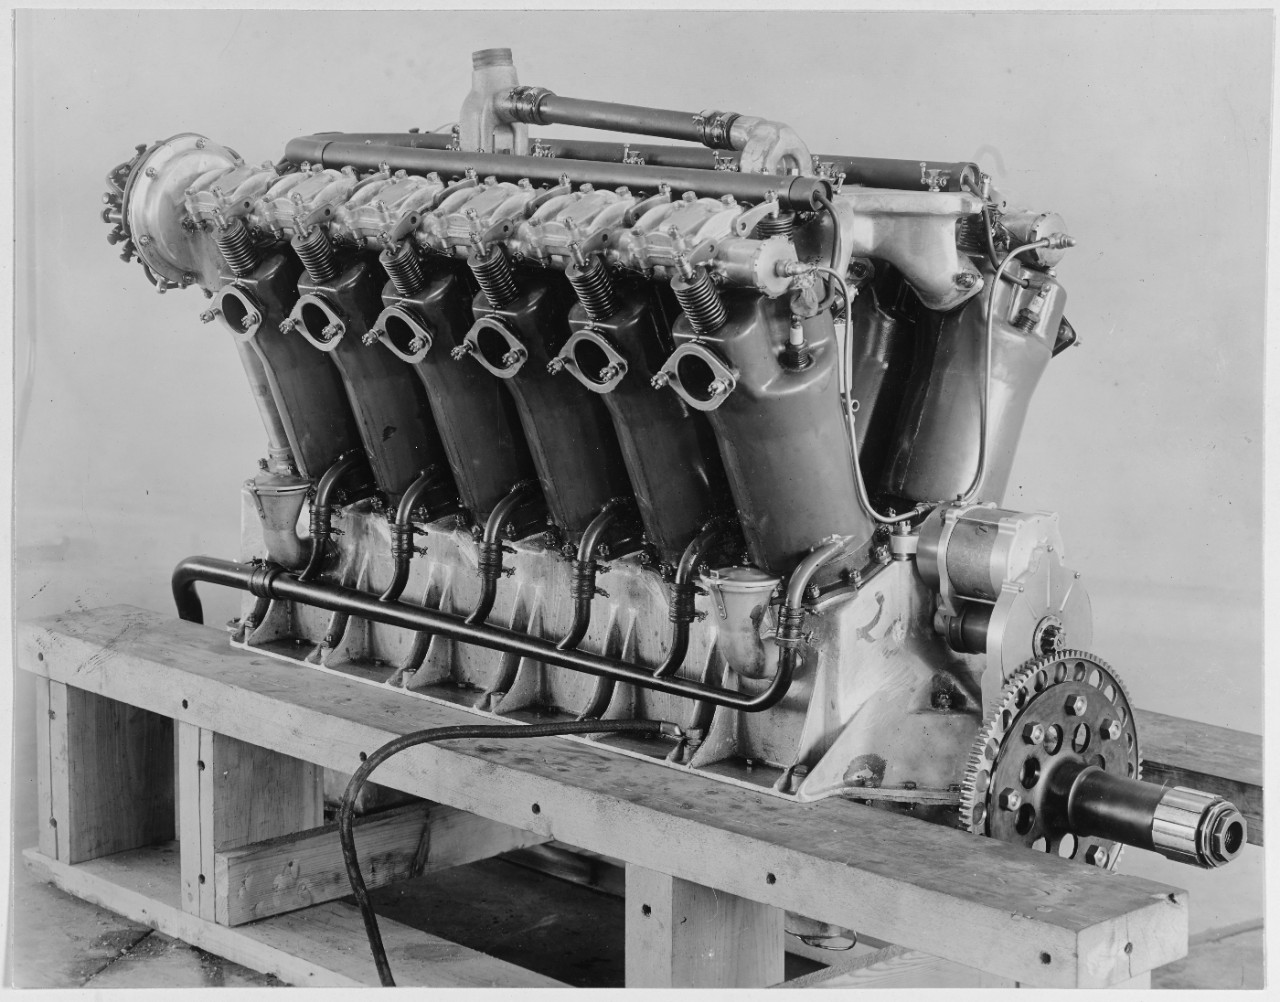 Photograph of an engine on wooden blocks